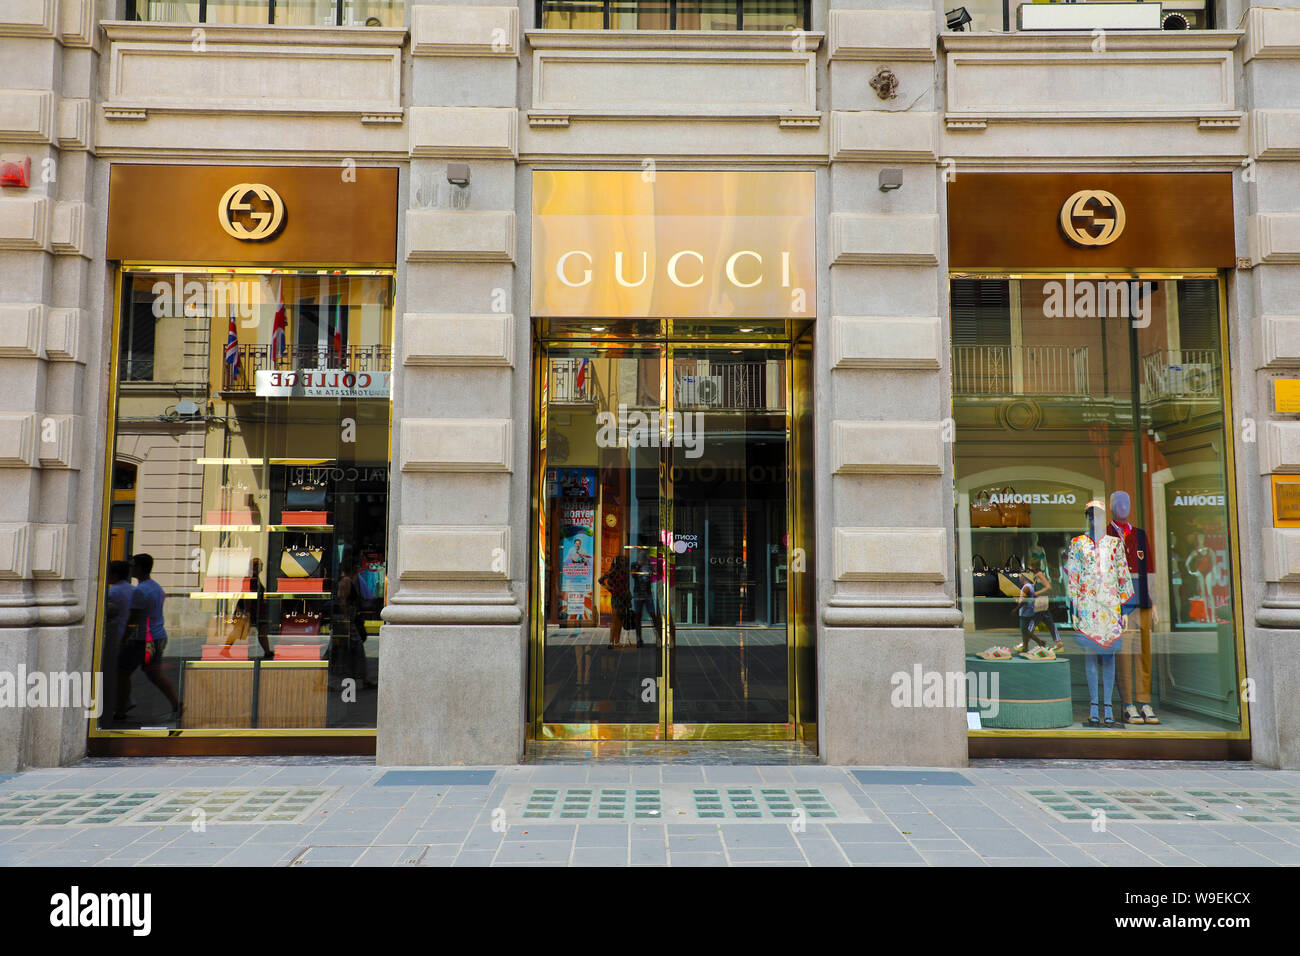 BARI, ITALY - JULY 30, 2019: Gucci boutique. Gucci is an Italian luxury brand of fashion and leather goods, founded by Guccio Gucci in Florence in 192 Stock Photo